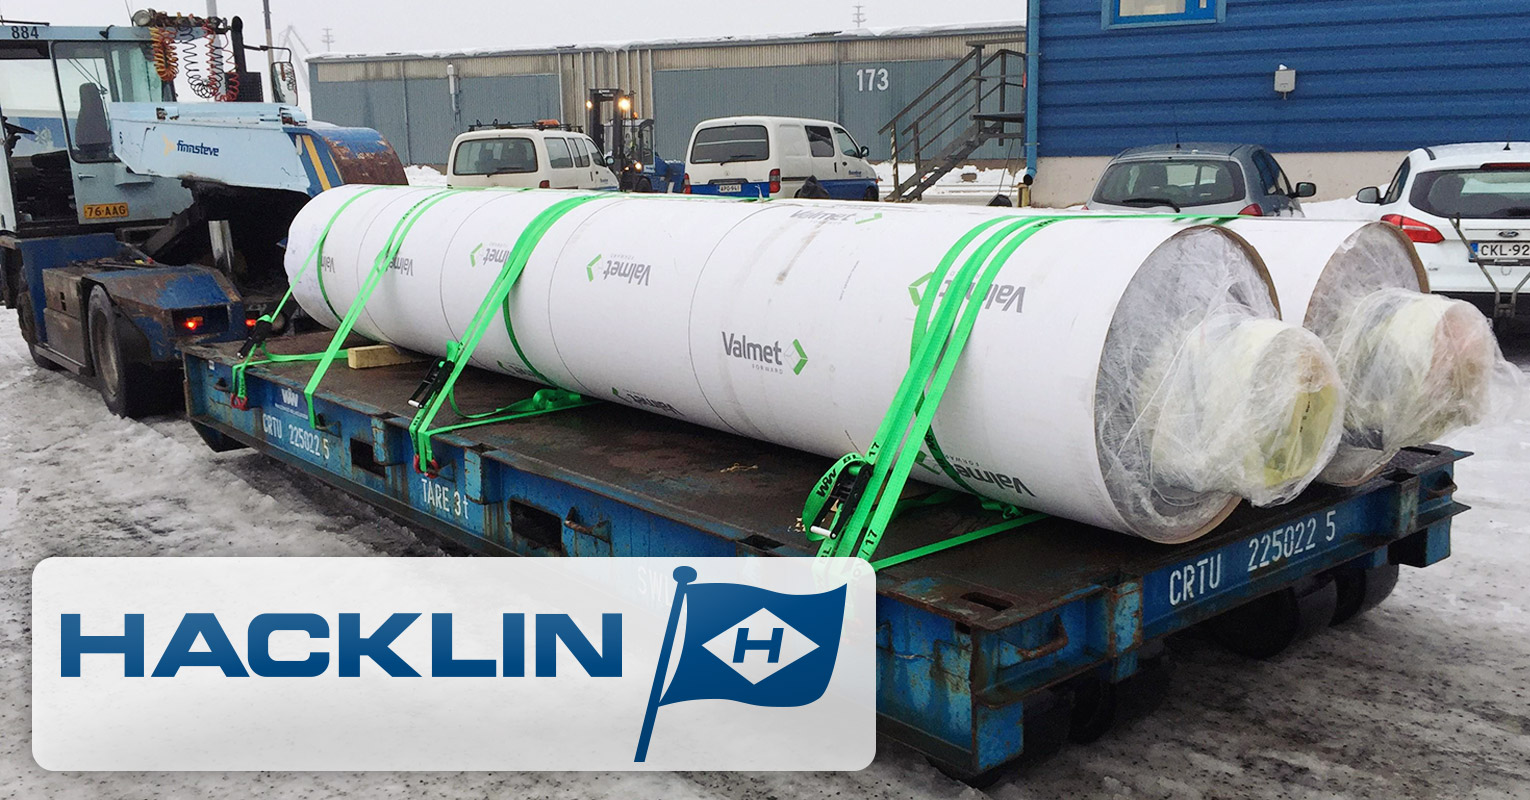 Hacklin Logistics Shipped a Two Rolls to South Africa via RoRo